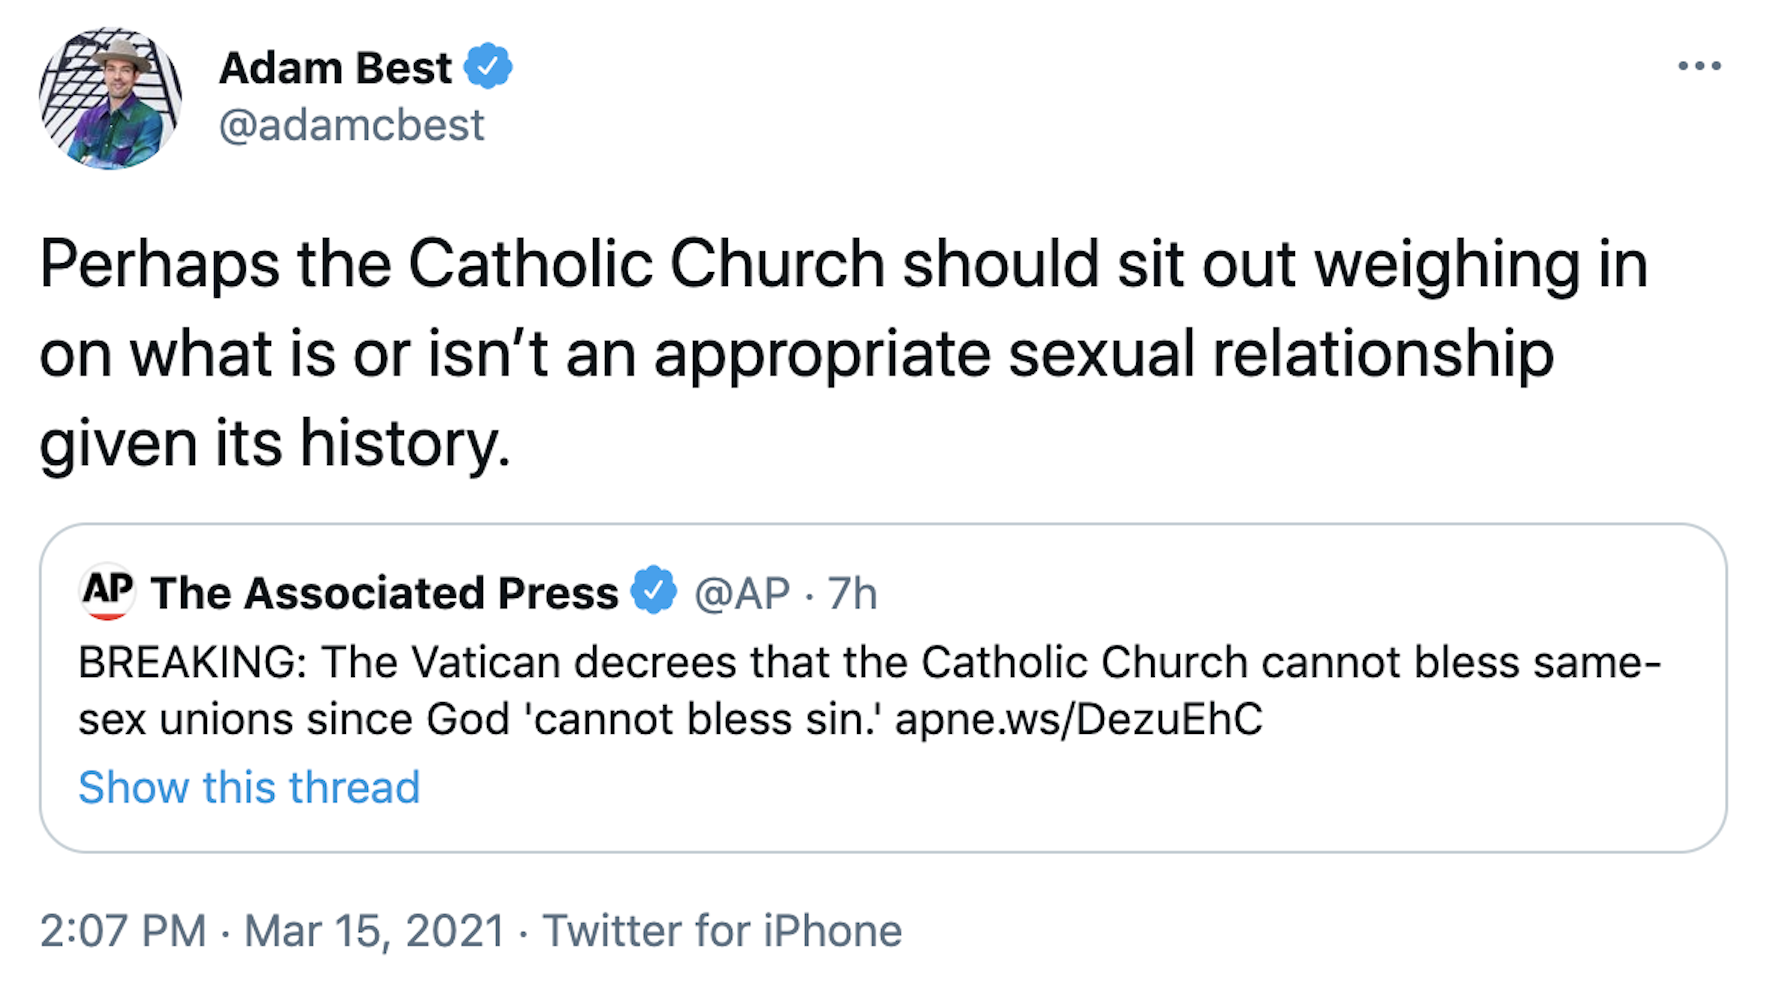 Perhaps the Catholic Church should sit out weighing in on what is or isn’t an appropriate sexual relationship given its history.